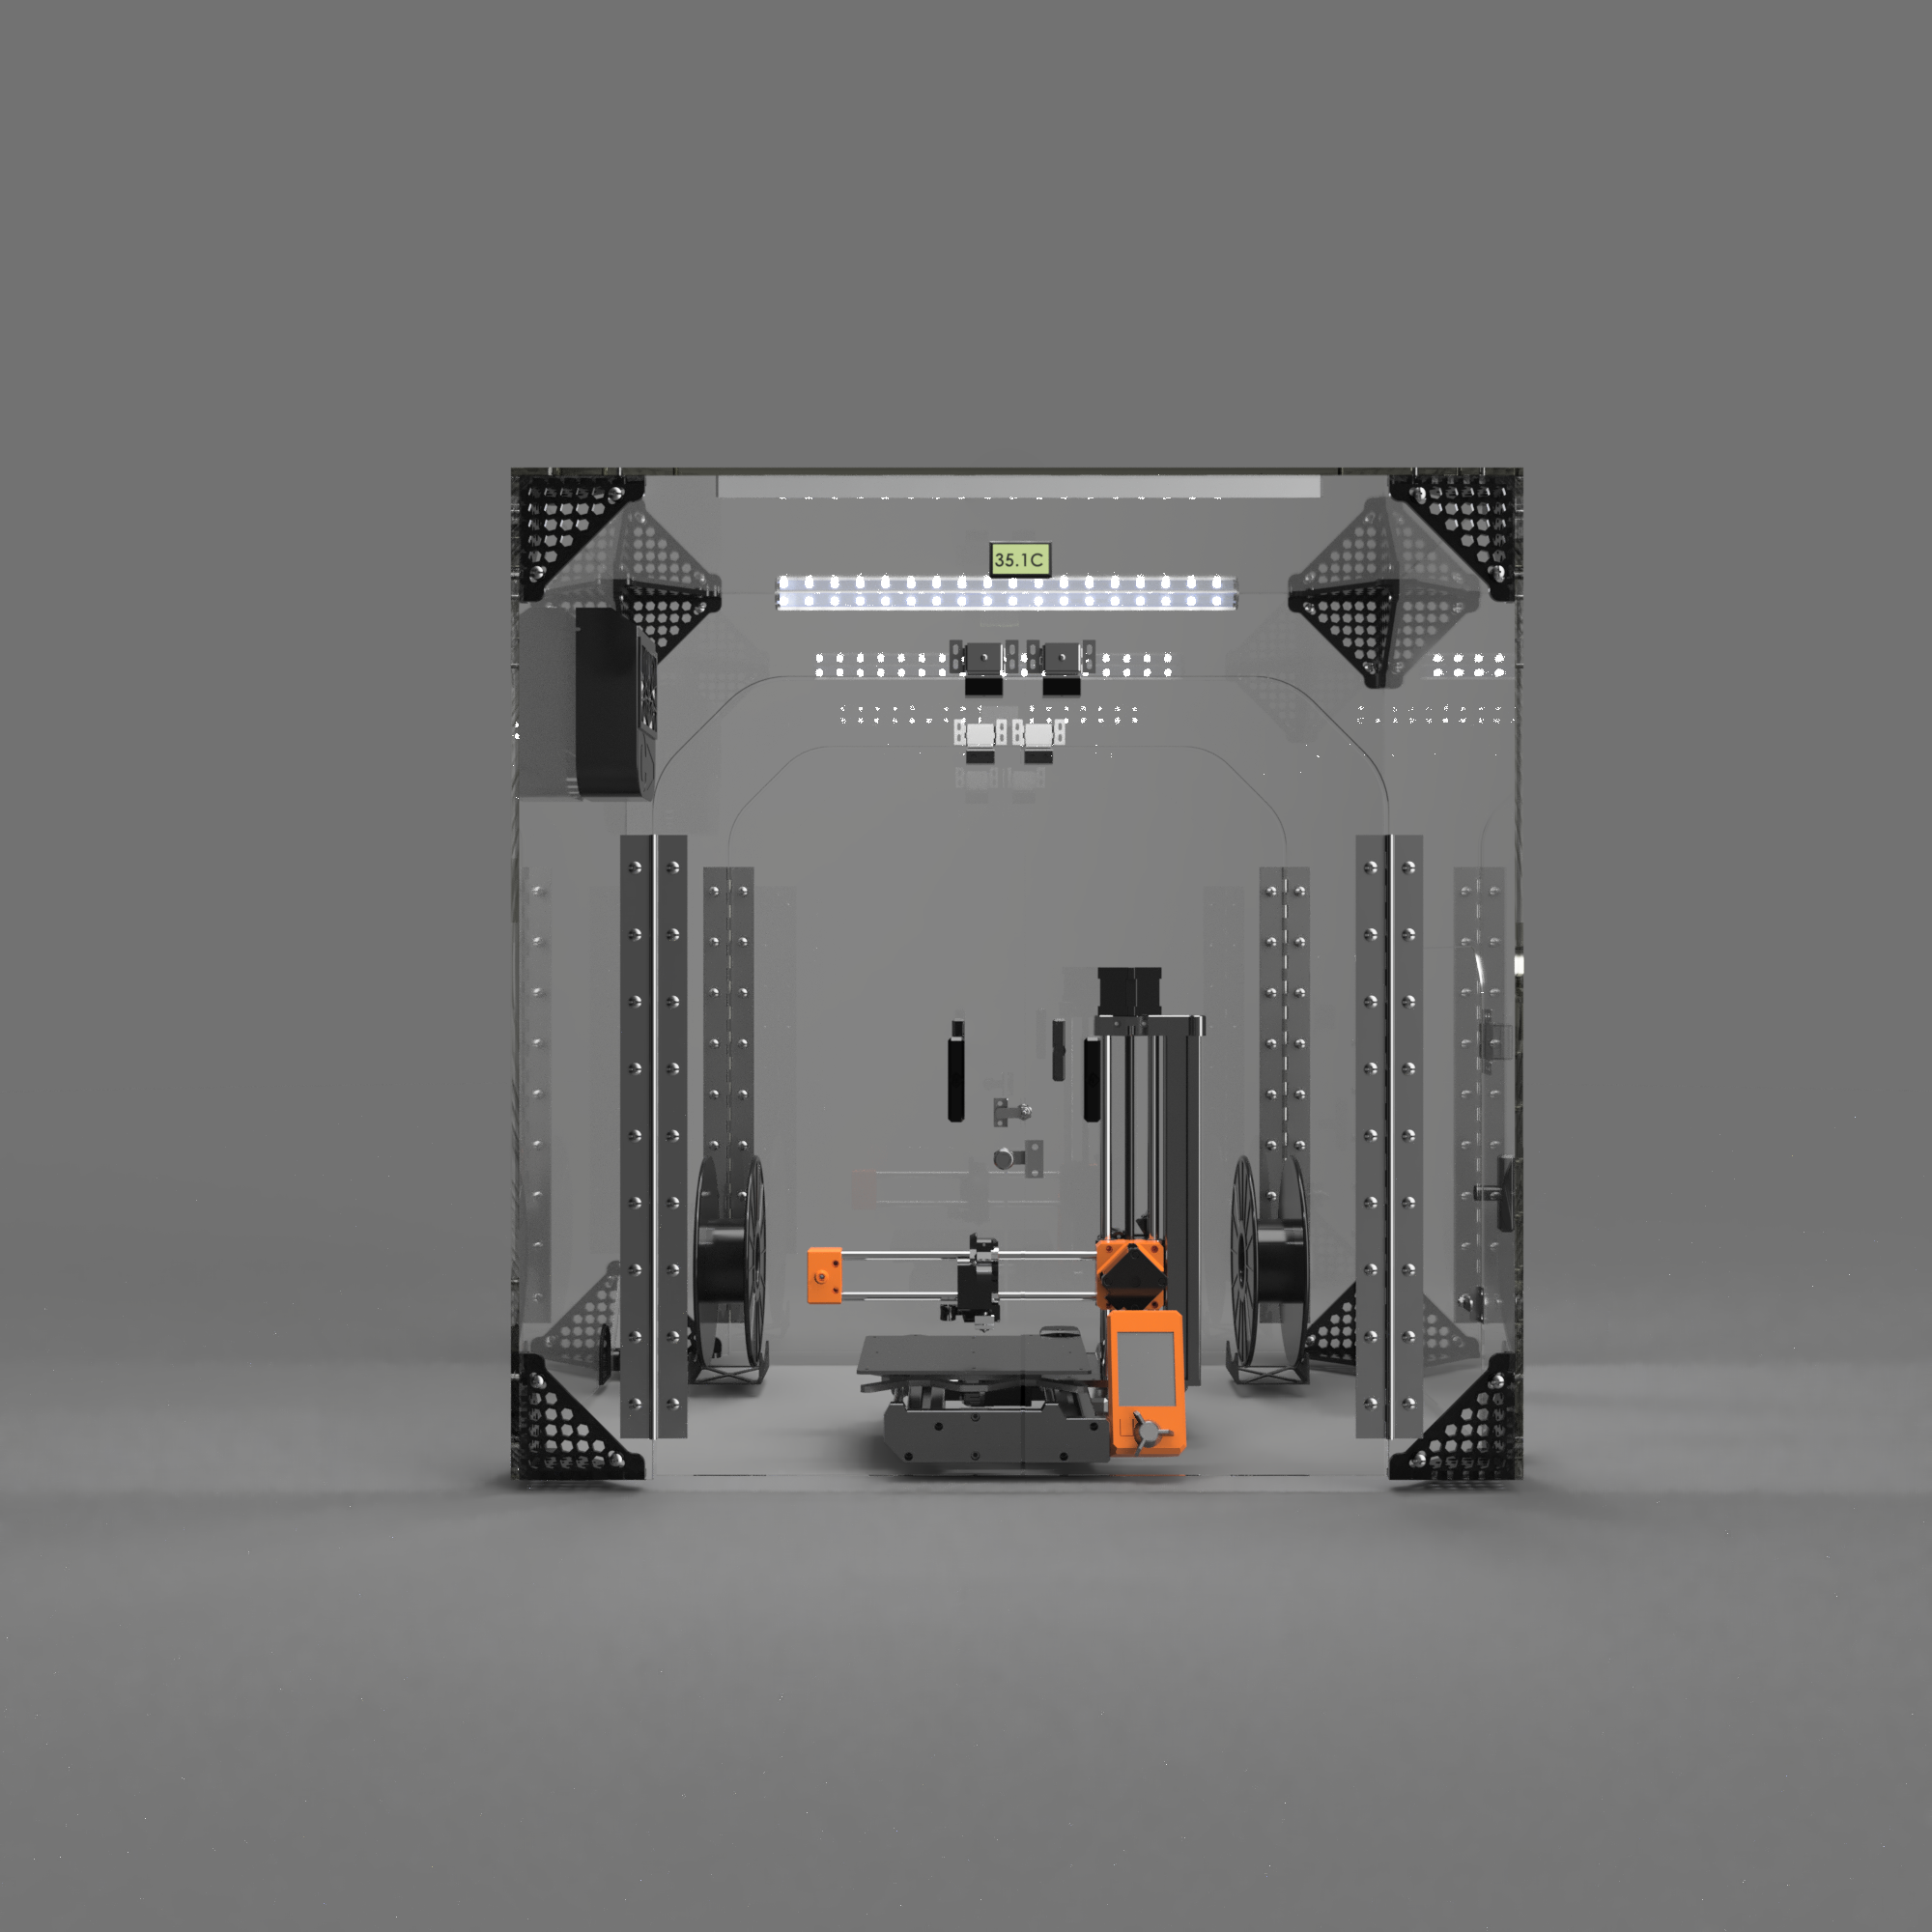 Institutional and Makerspace 3D printer enclosures